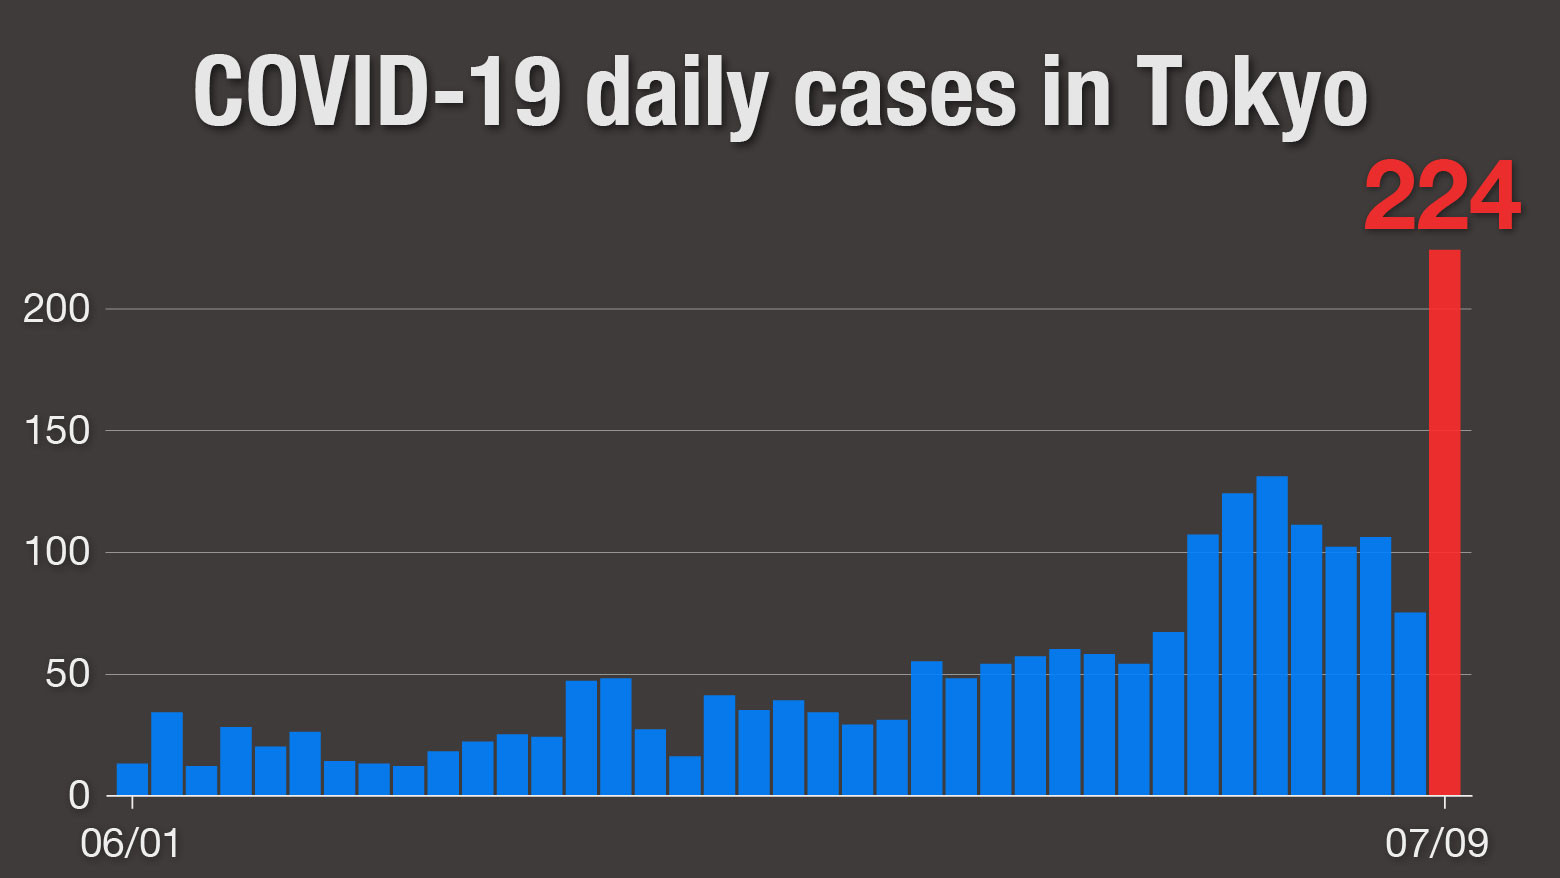 Restrictions lifted one day after Tokyo records record number of new coronavirus cases